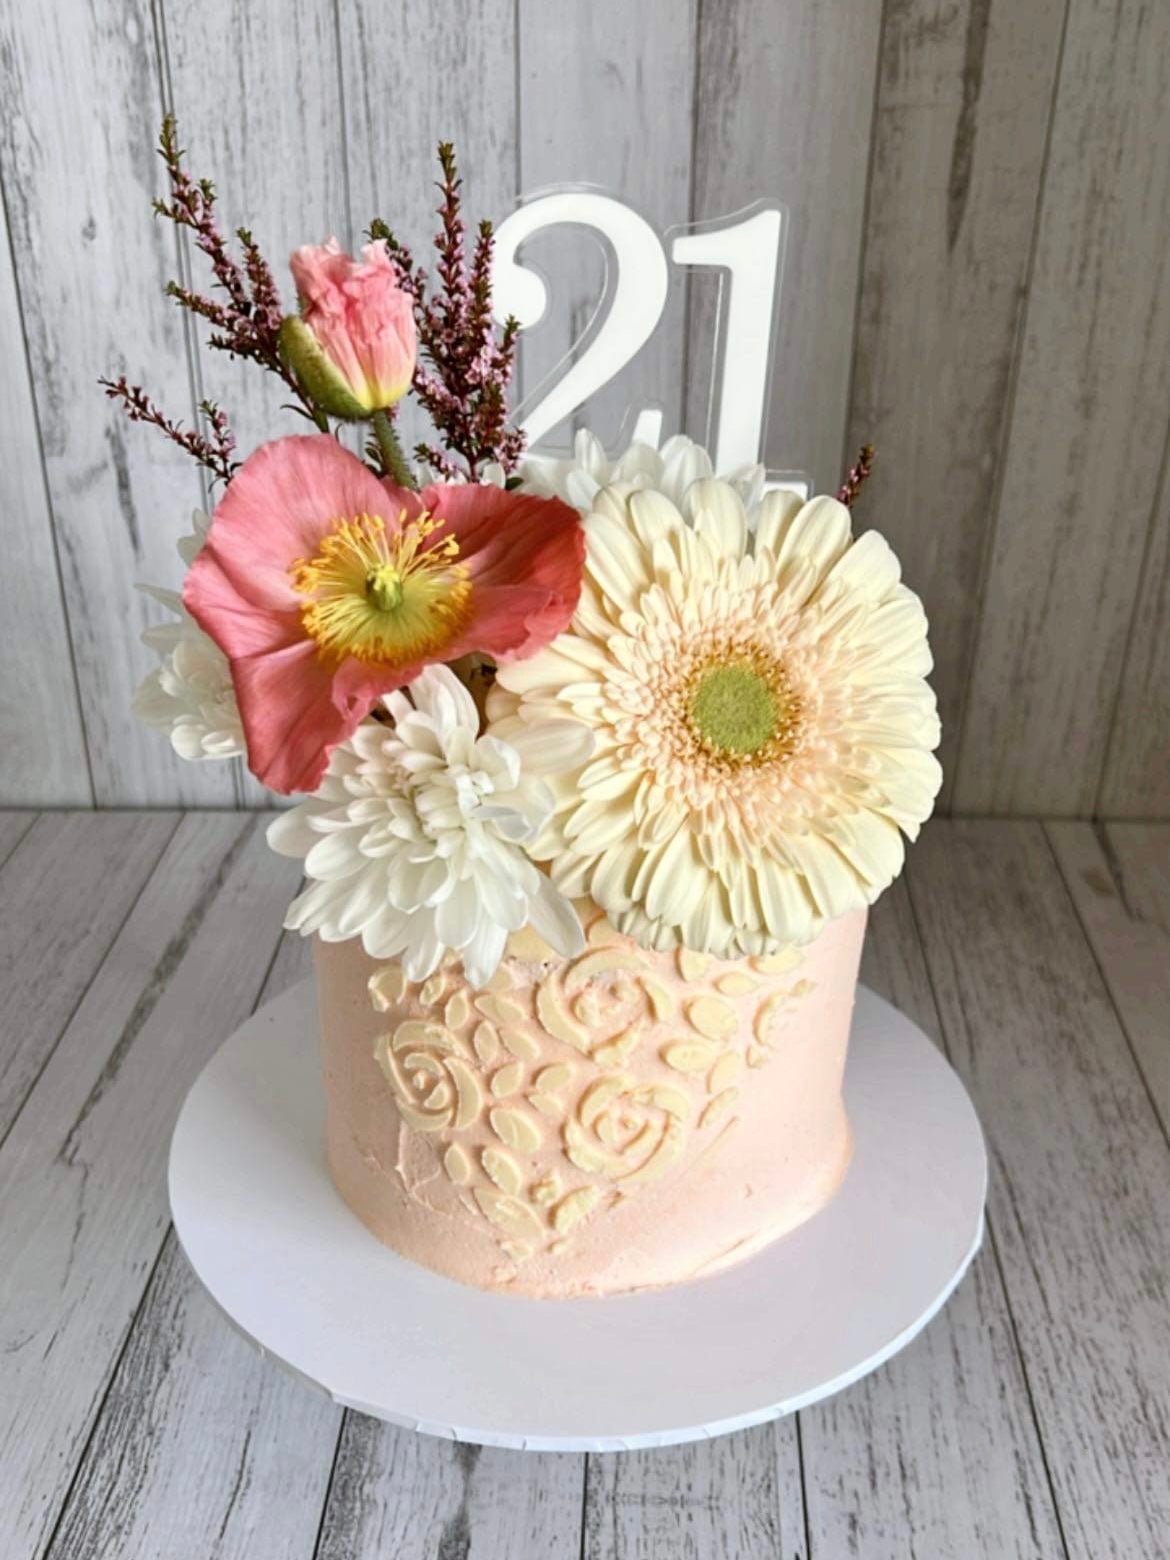 Acrylic Number Cake Topper - The Humble Gift Co.